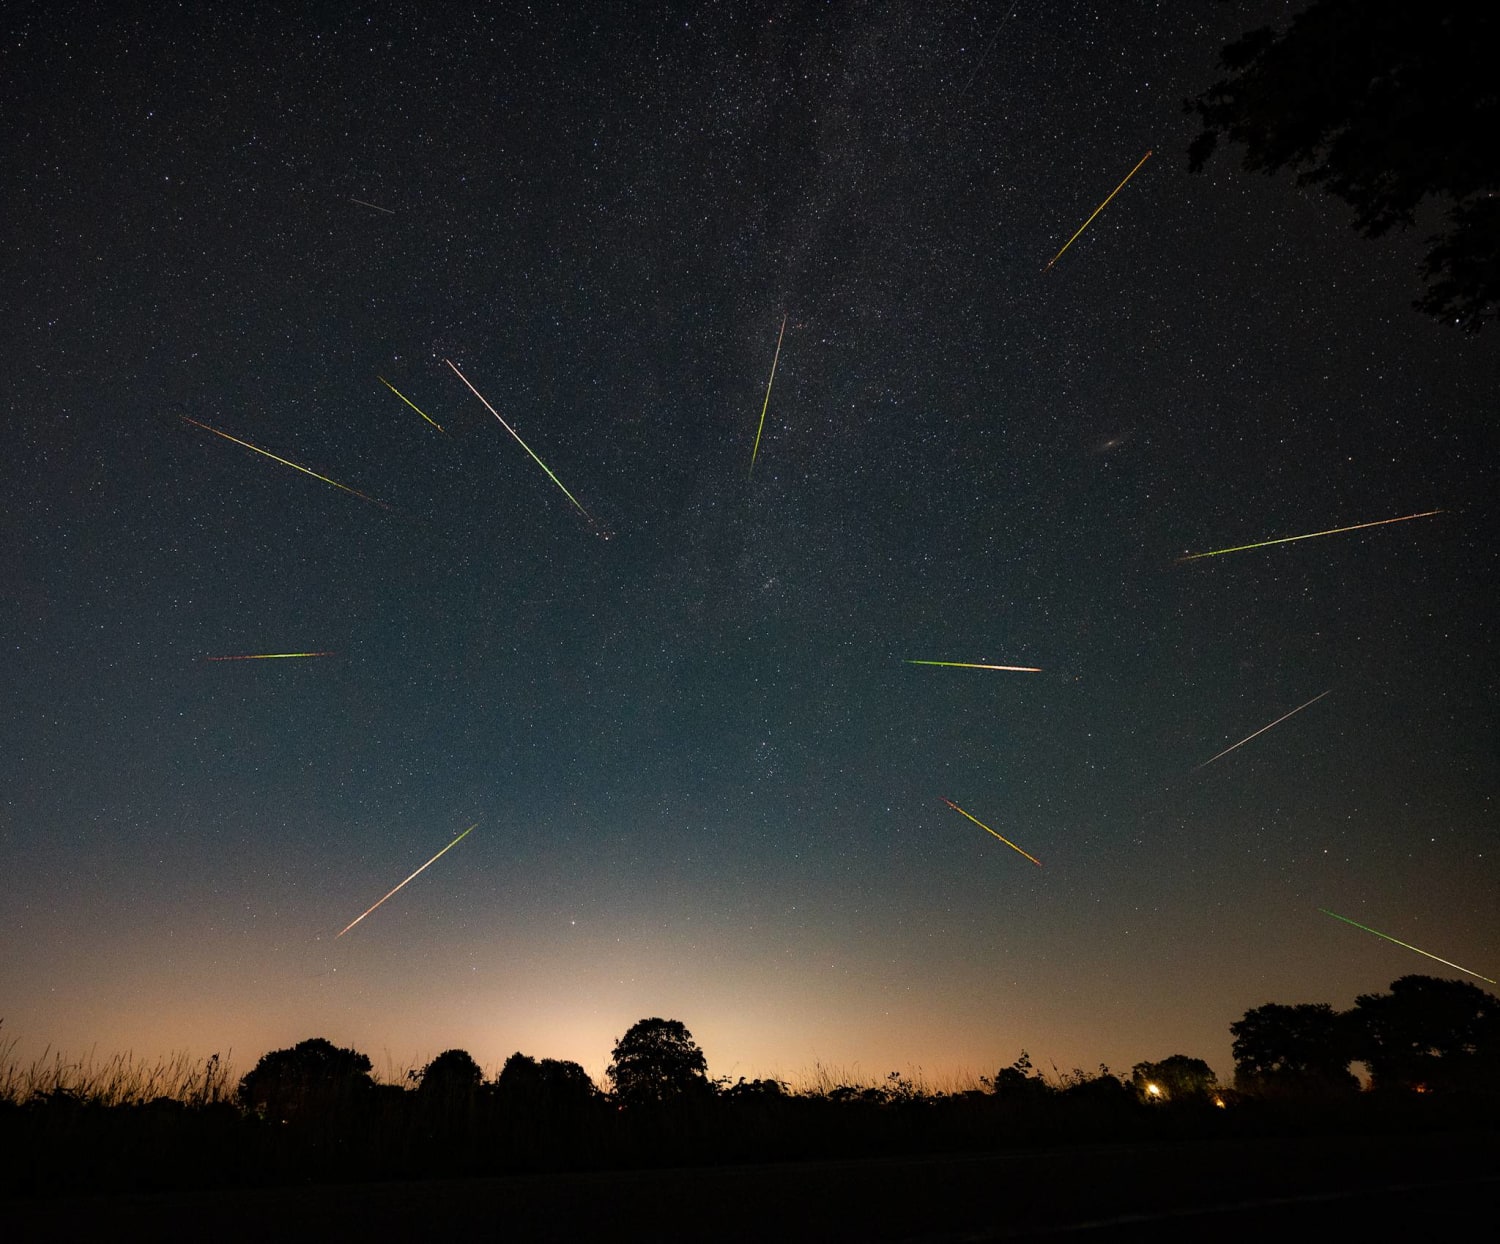 The Perseids over The Netherlands